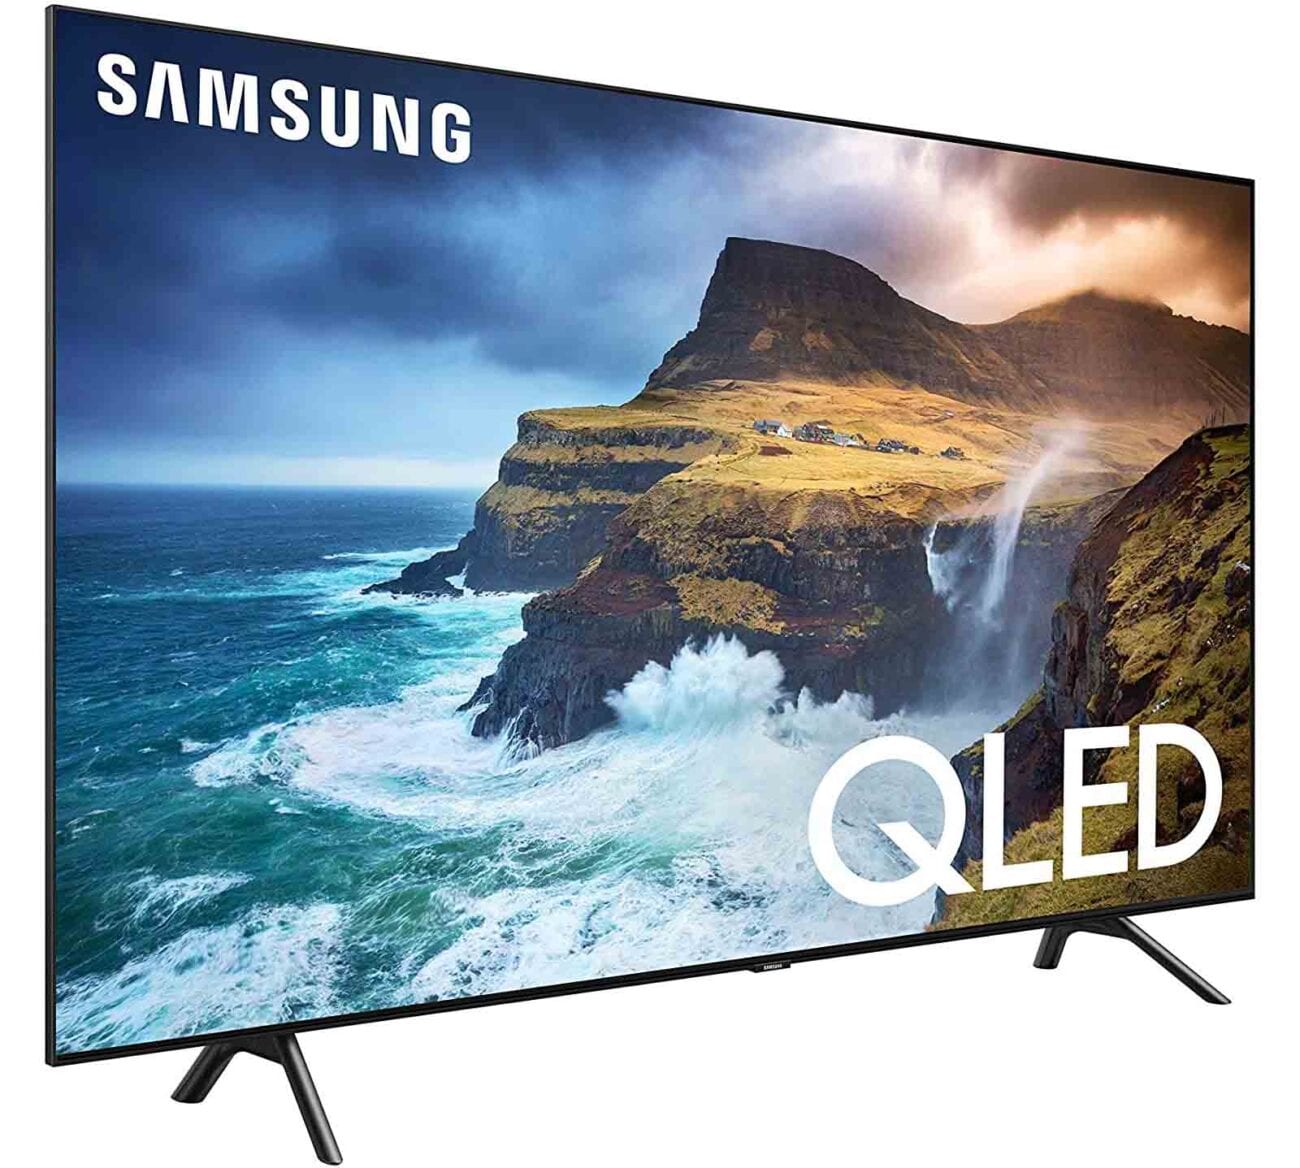 Looking to catch up on all your favorite TV shows on a new HD screen? Peruse some of Samsung's new high-tech TVs currently for sale.